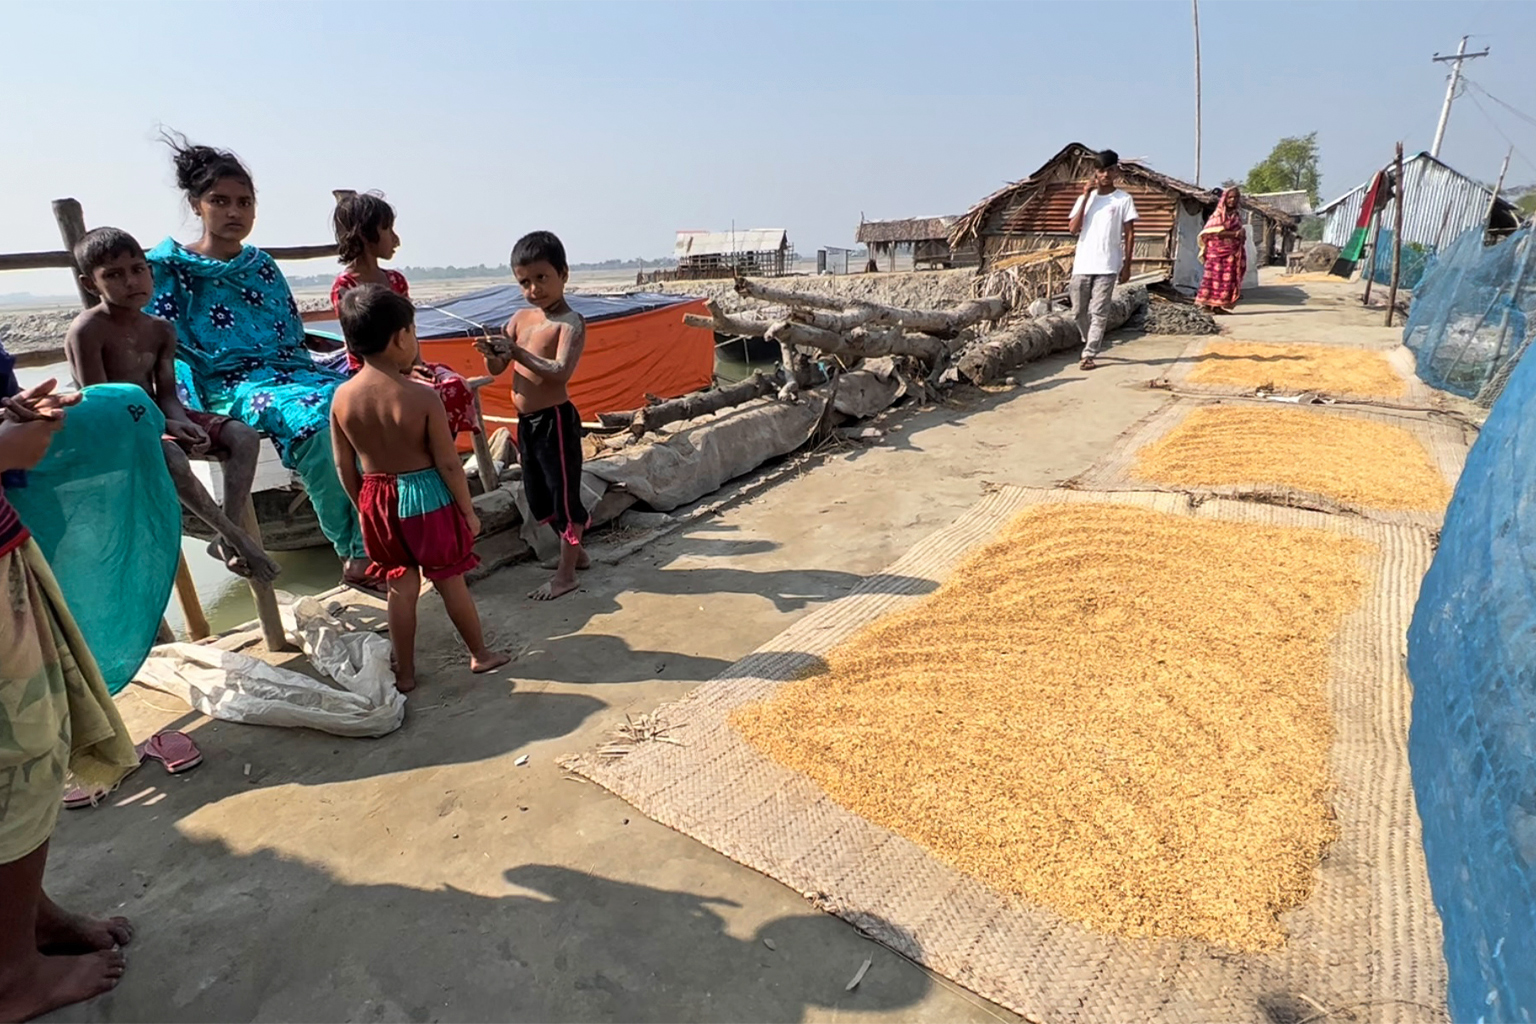 The coastal communities in Satkhira are heavily dependent on agriculture